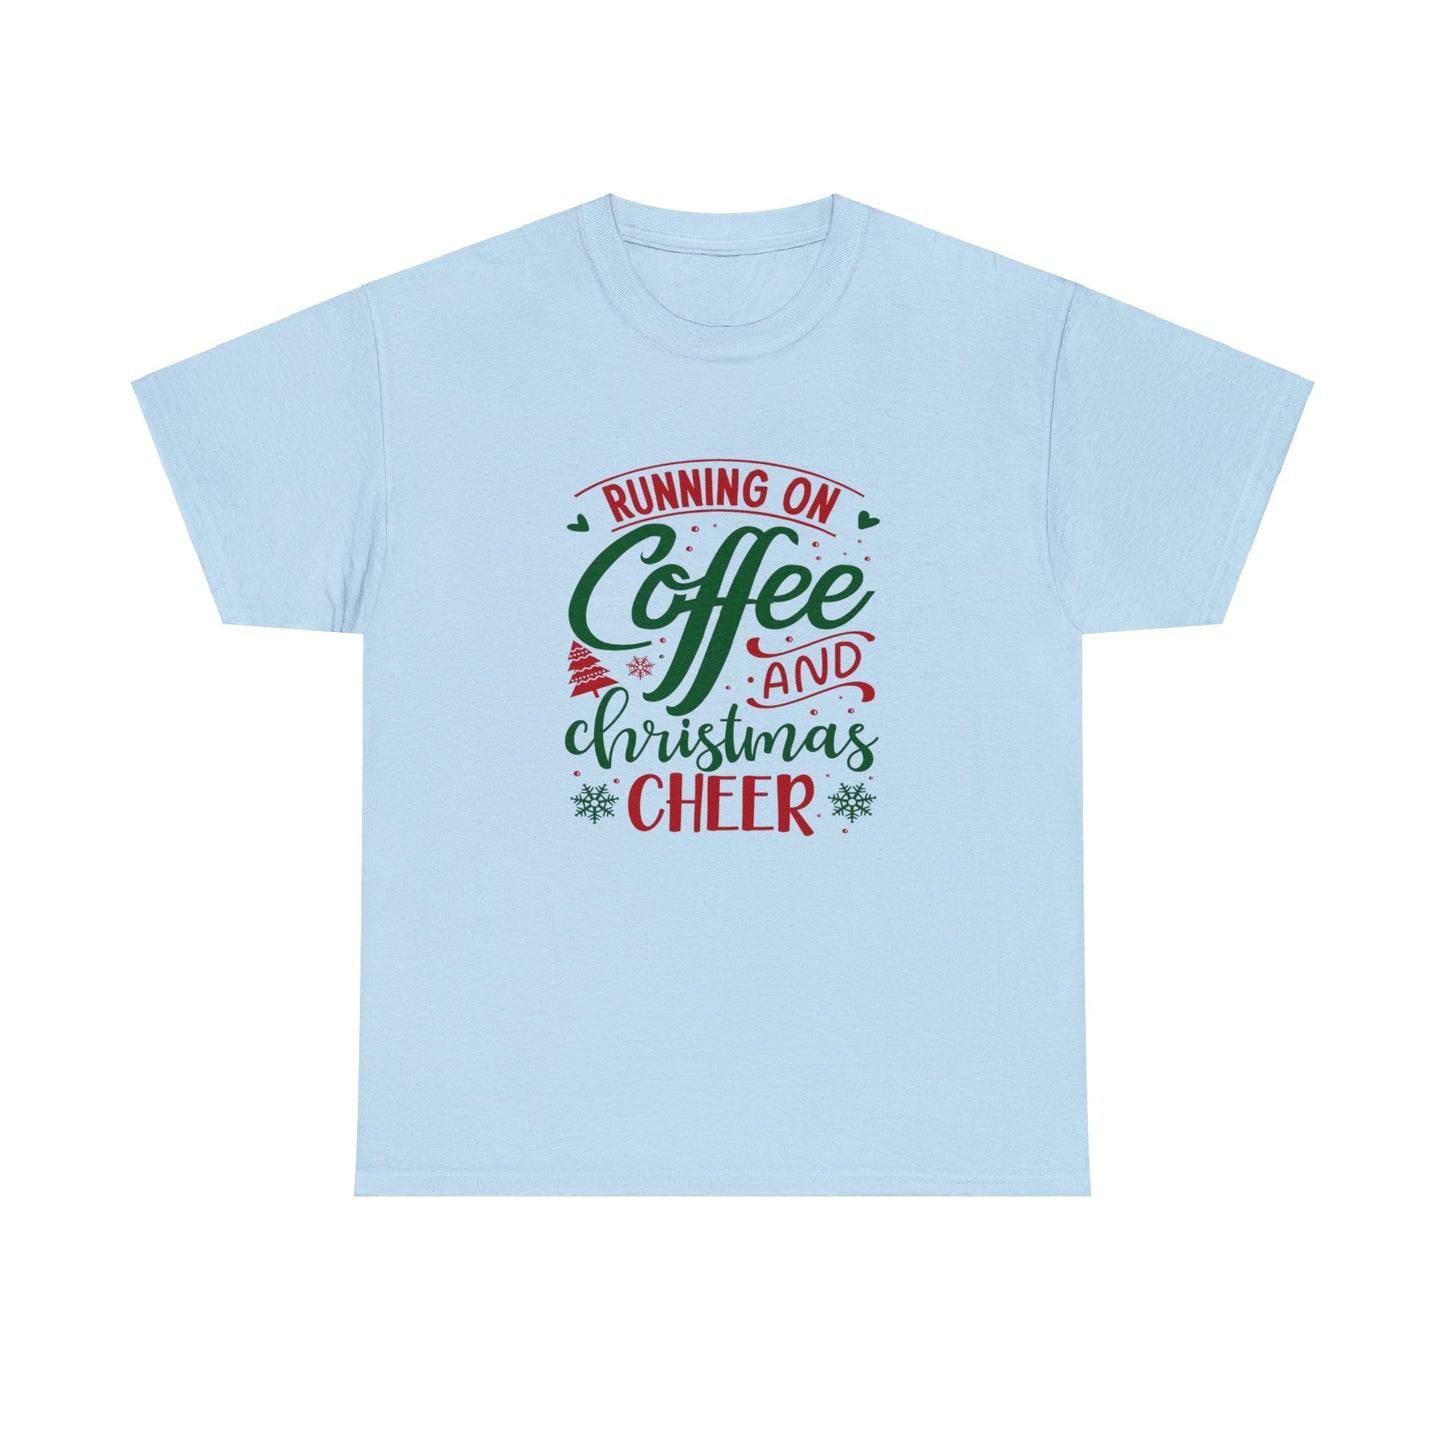 Christmas Cheer T-Shirt For Holiday Coffee TShirt For Festive Party T Shirt For Winter Vibes Gift